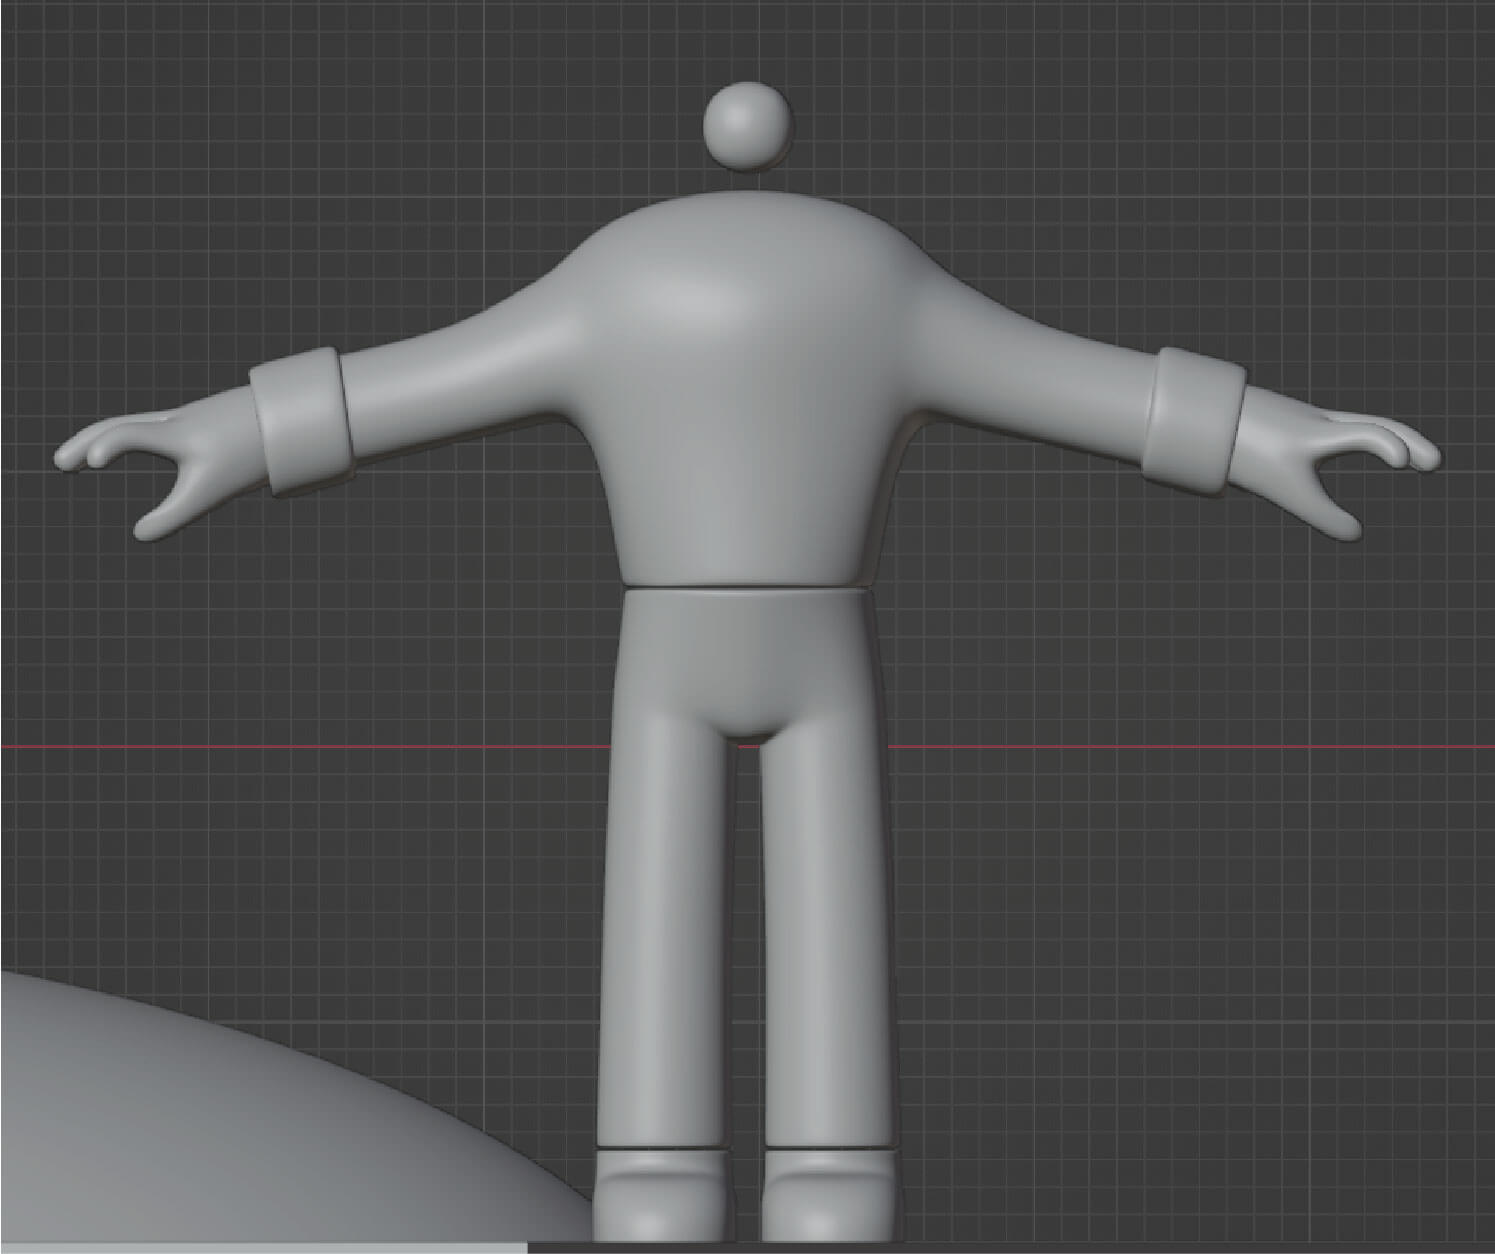 Basic character 3D model in T pose